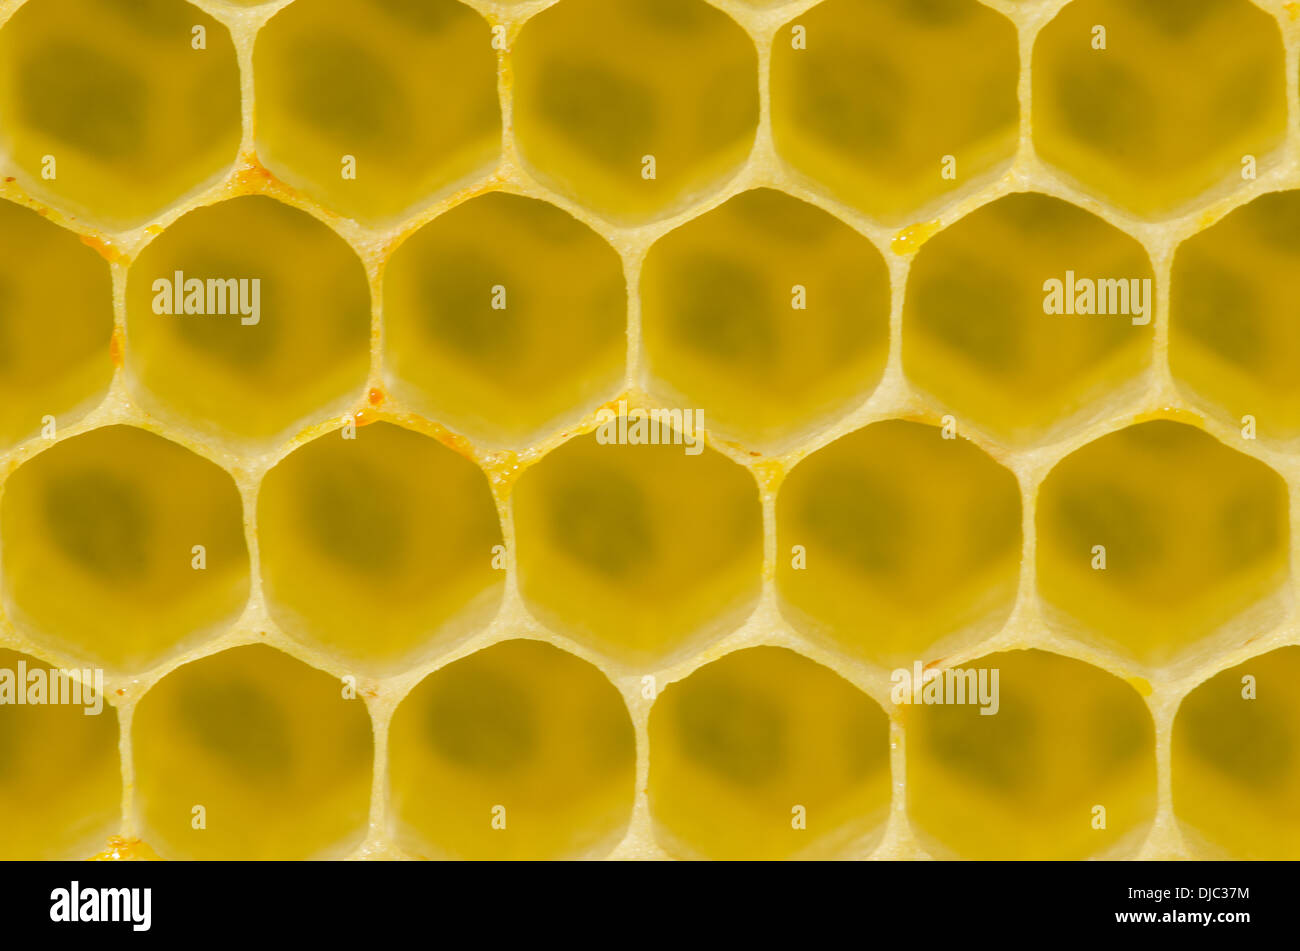 Honeycomb pattern with yellow empty cells in daylight Stock Photo